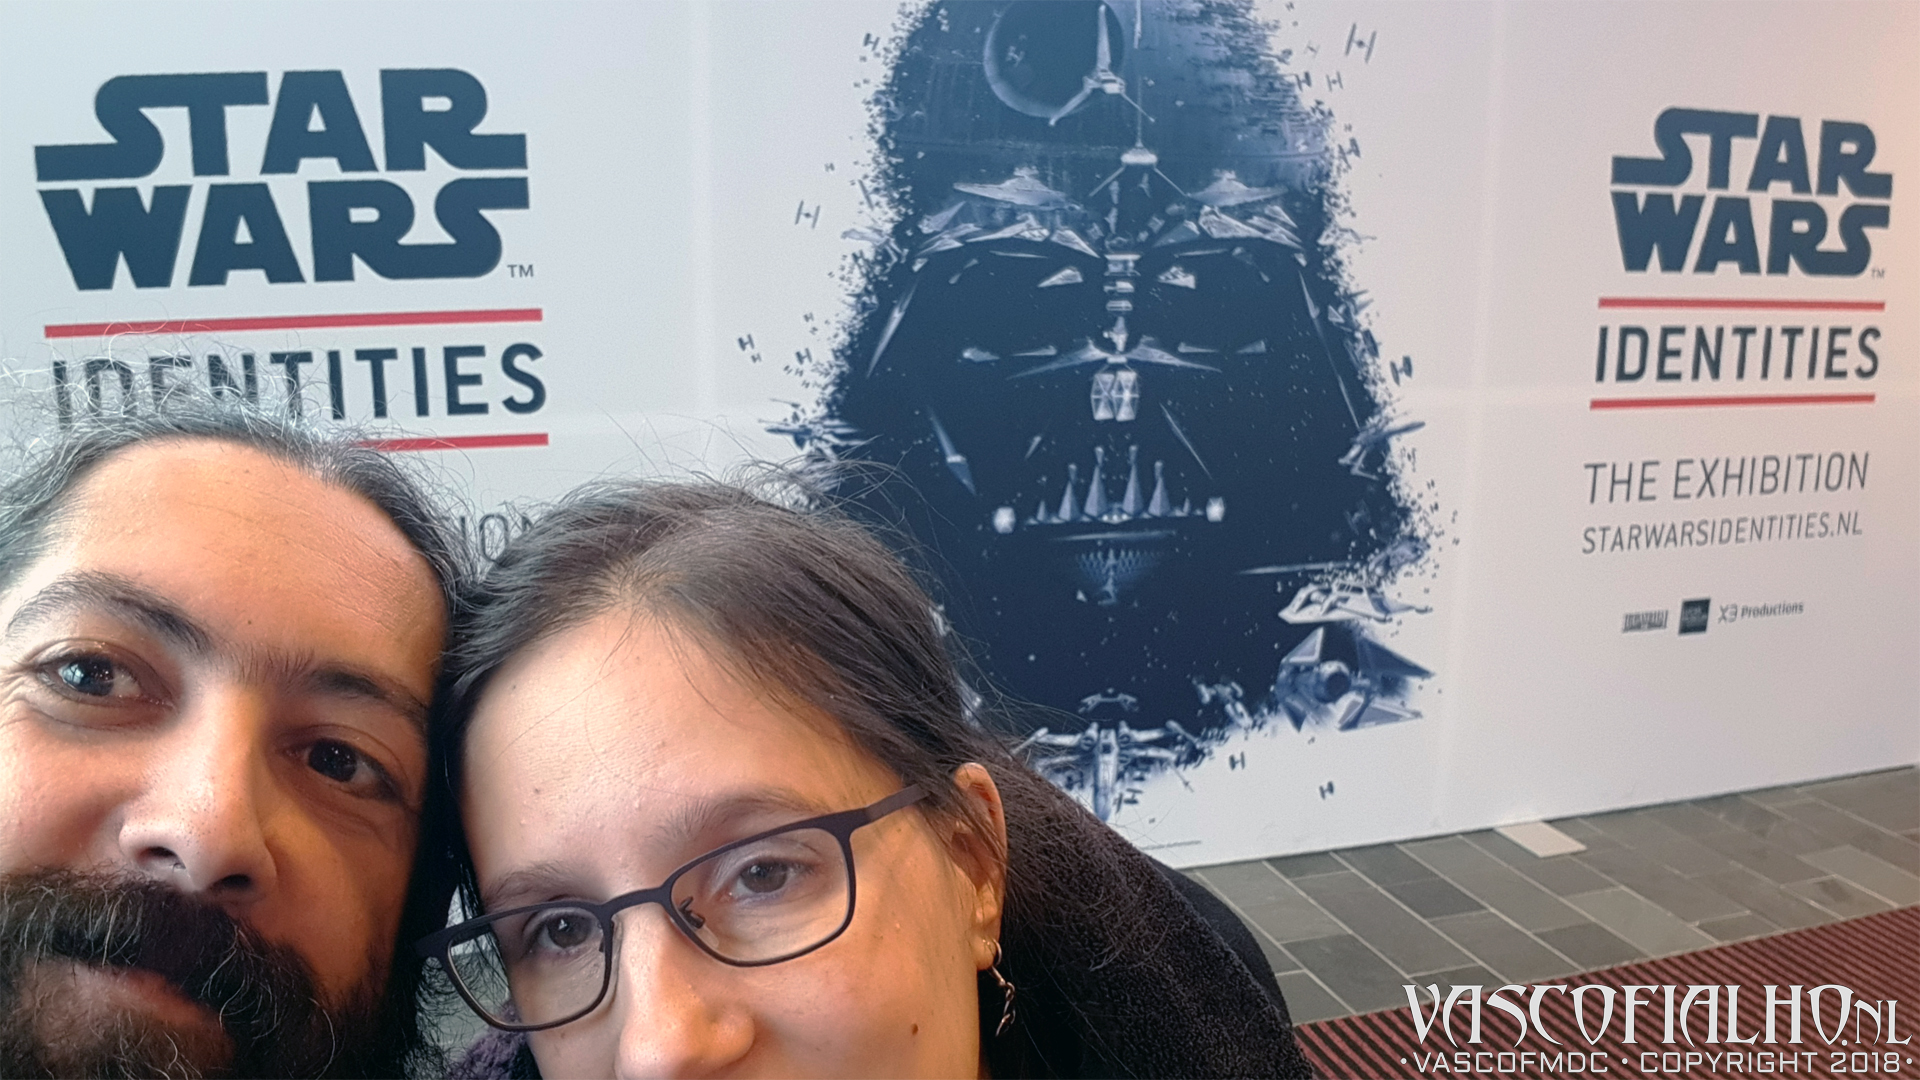 My visit to Star Wars Identities in Utrecht NL, January 20th of 2018